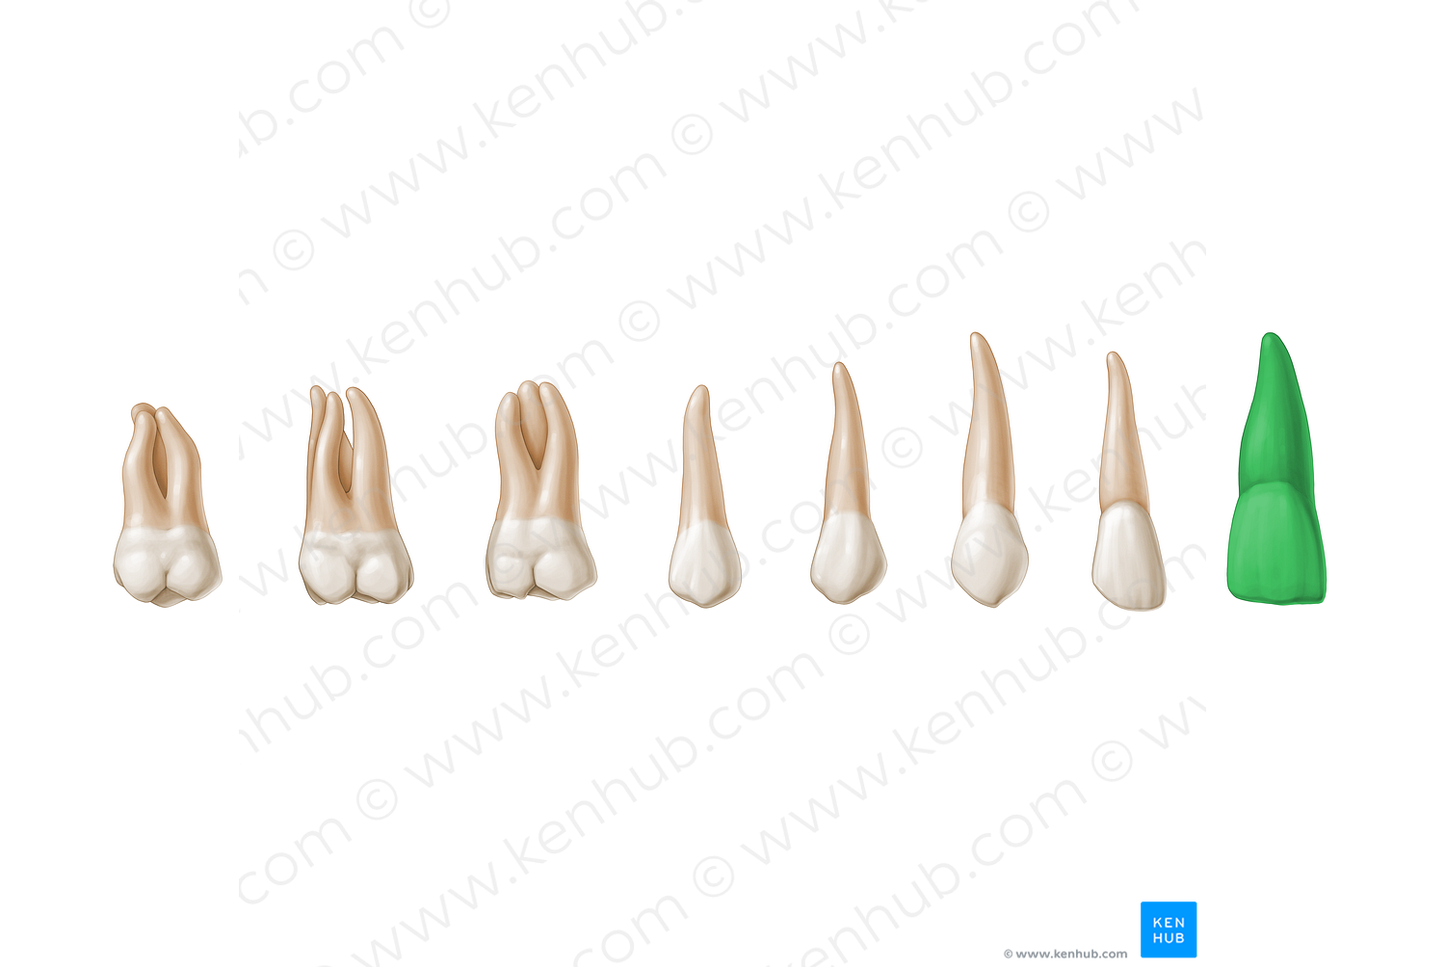 Central incisor tooth (#3202)